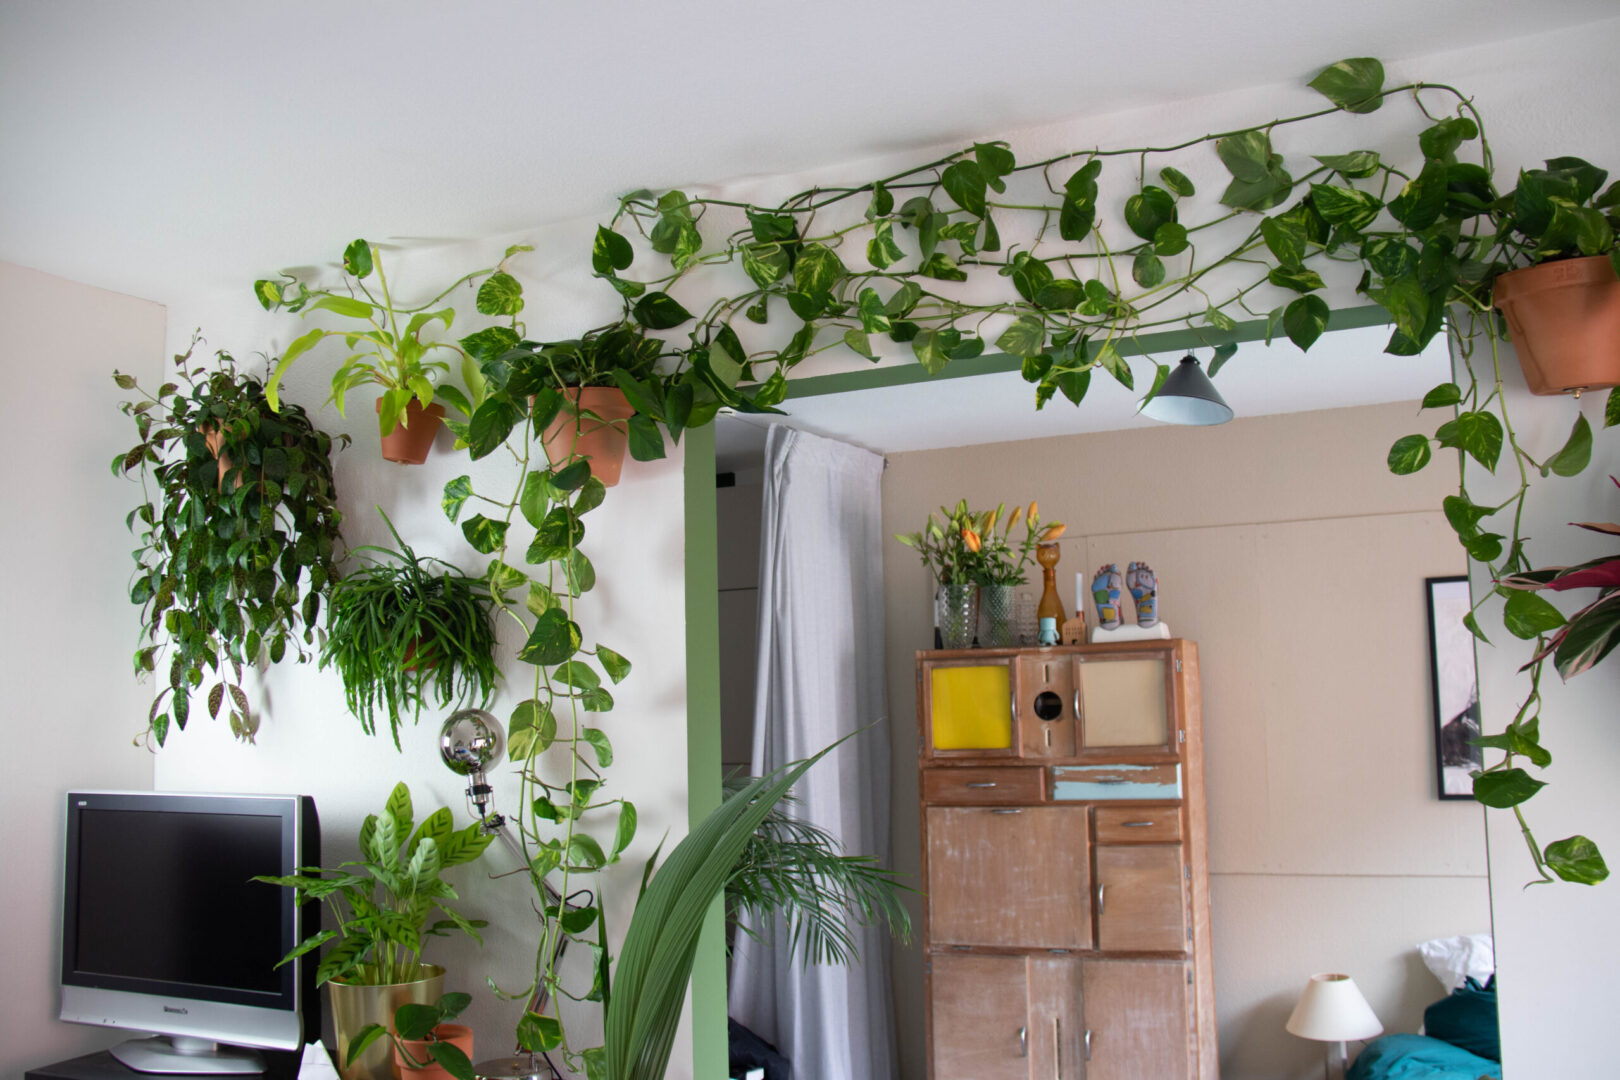 How to hang plants on your walls - 5 different methods to try in